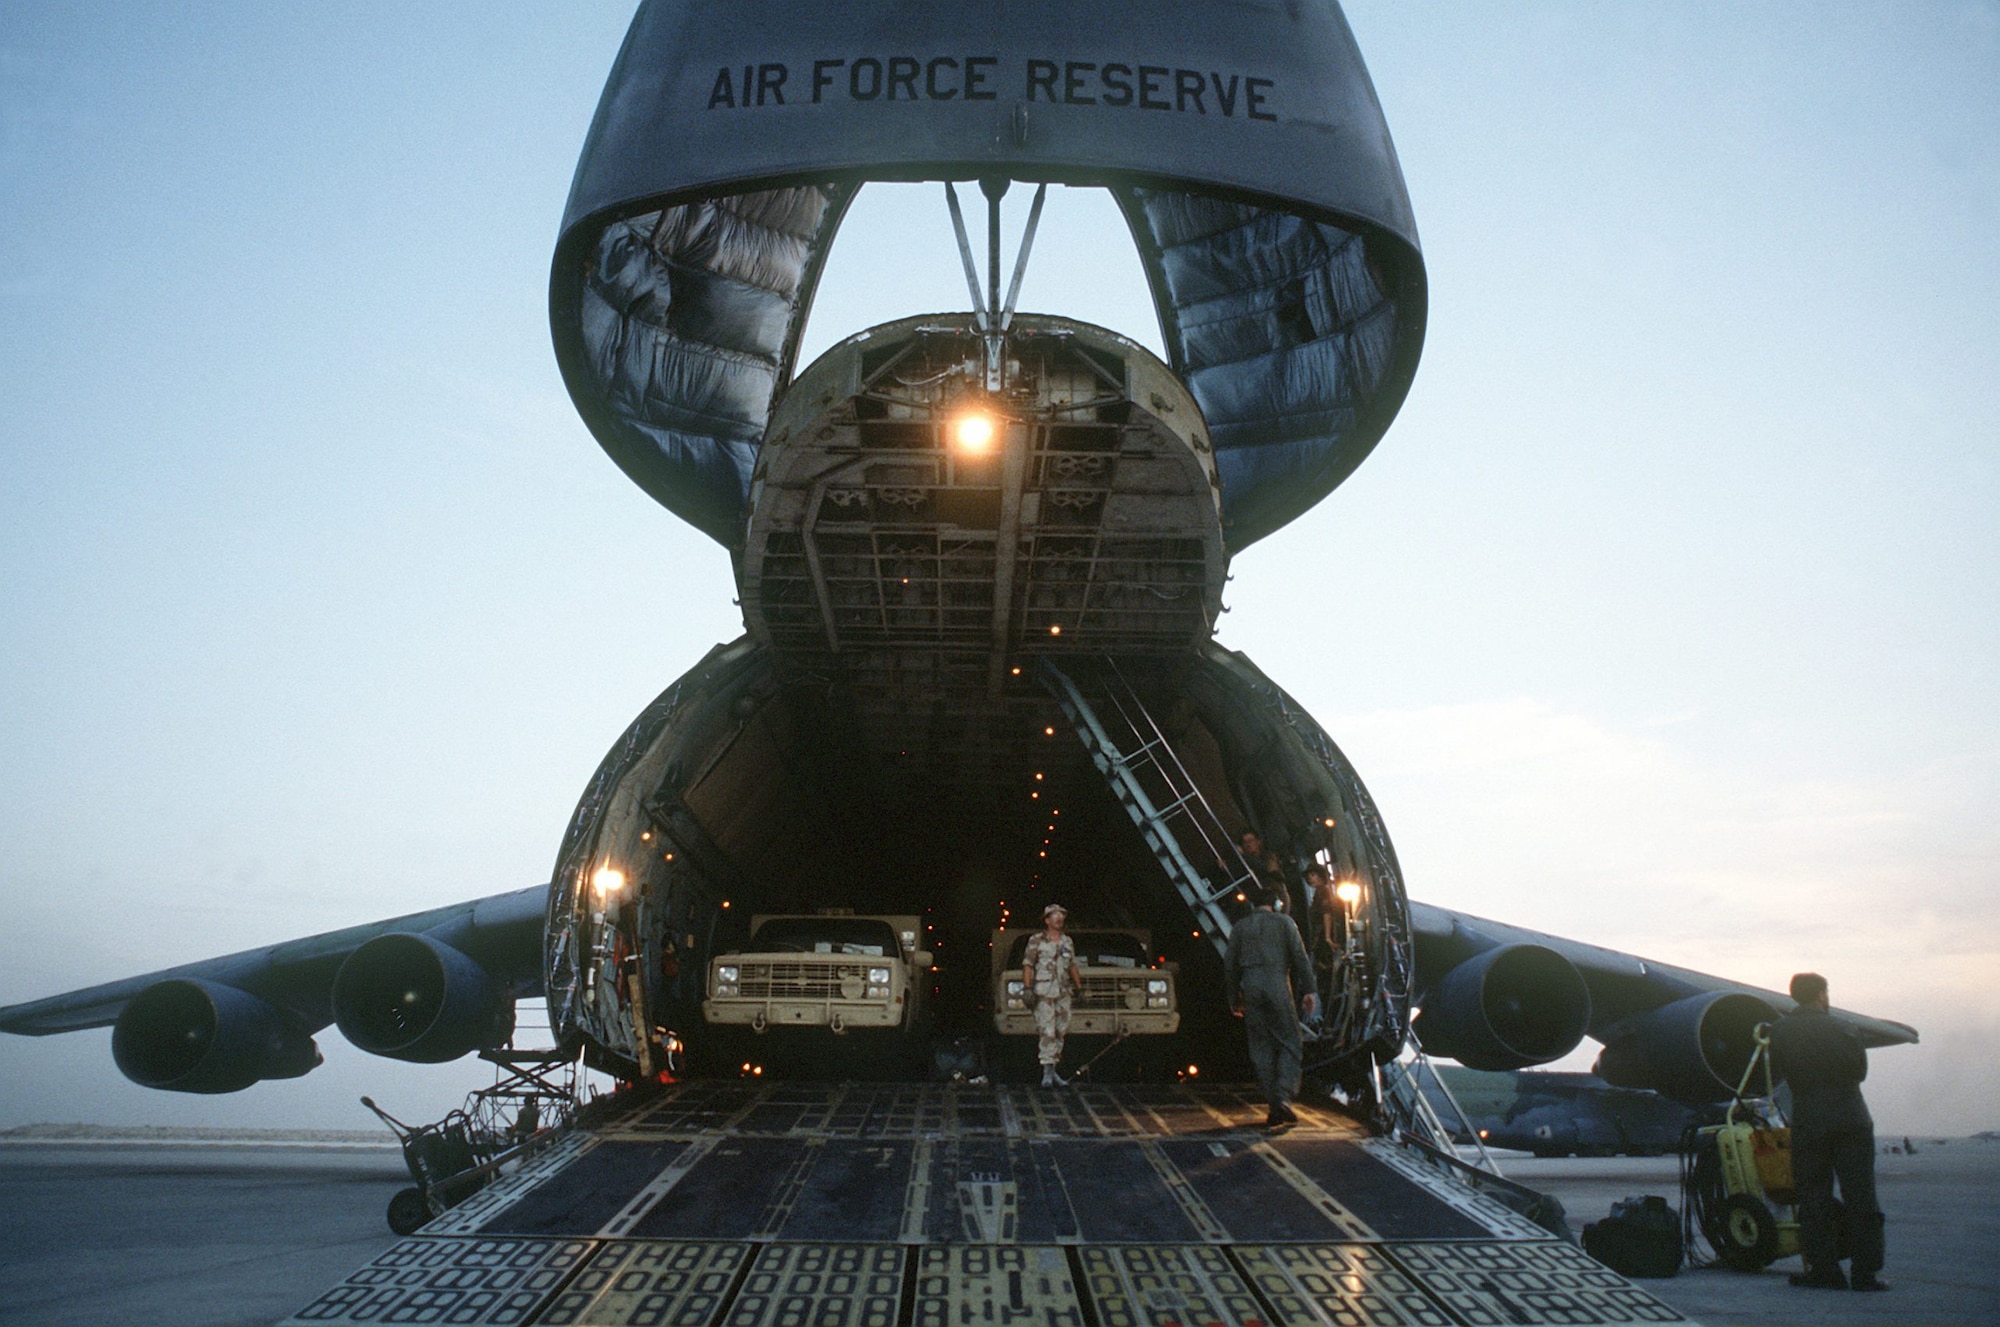 Military trucks are unloaded from the nose ramp of a C-5A Galaxy transport aircraft of the U.S. Air Force Reserve, Military Airlift Command, in support of Operation Desert Shield.